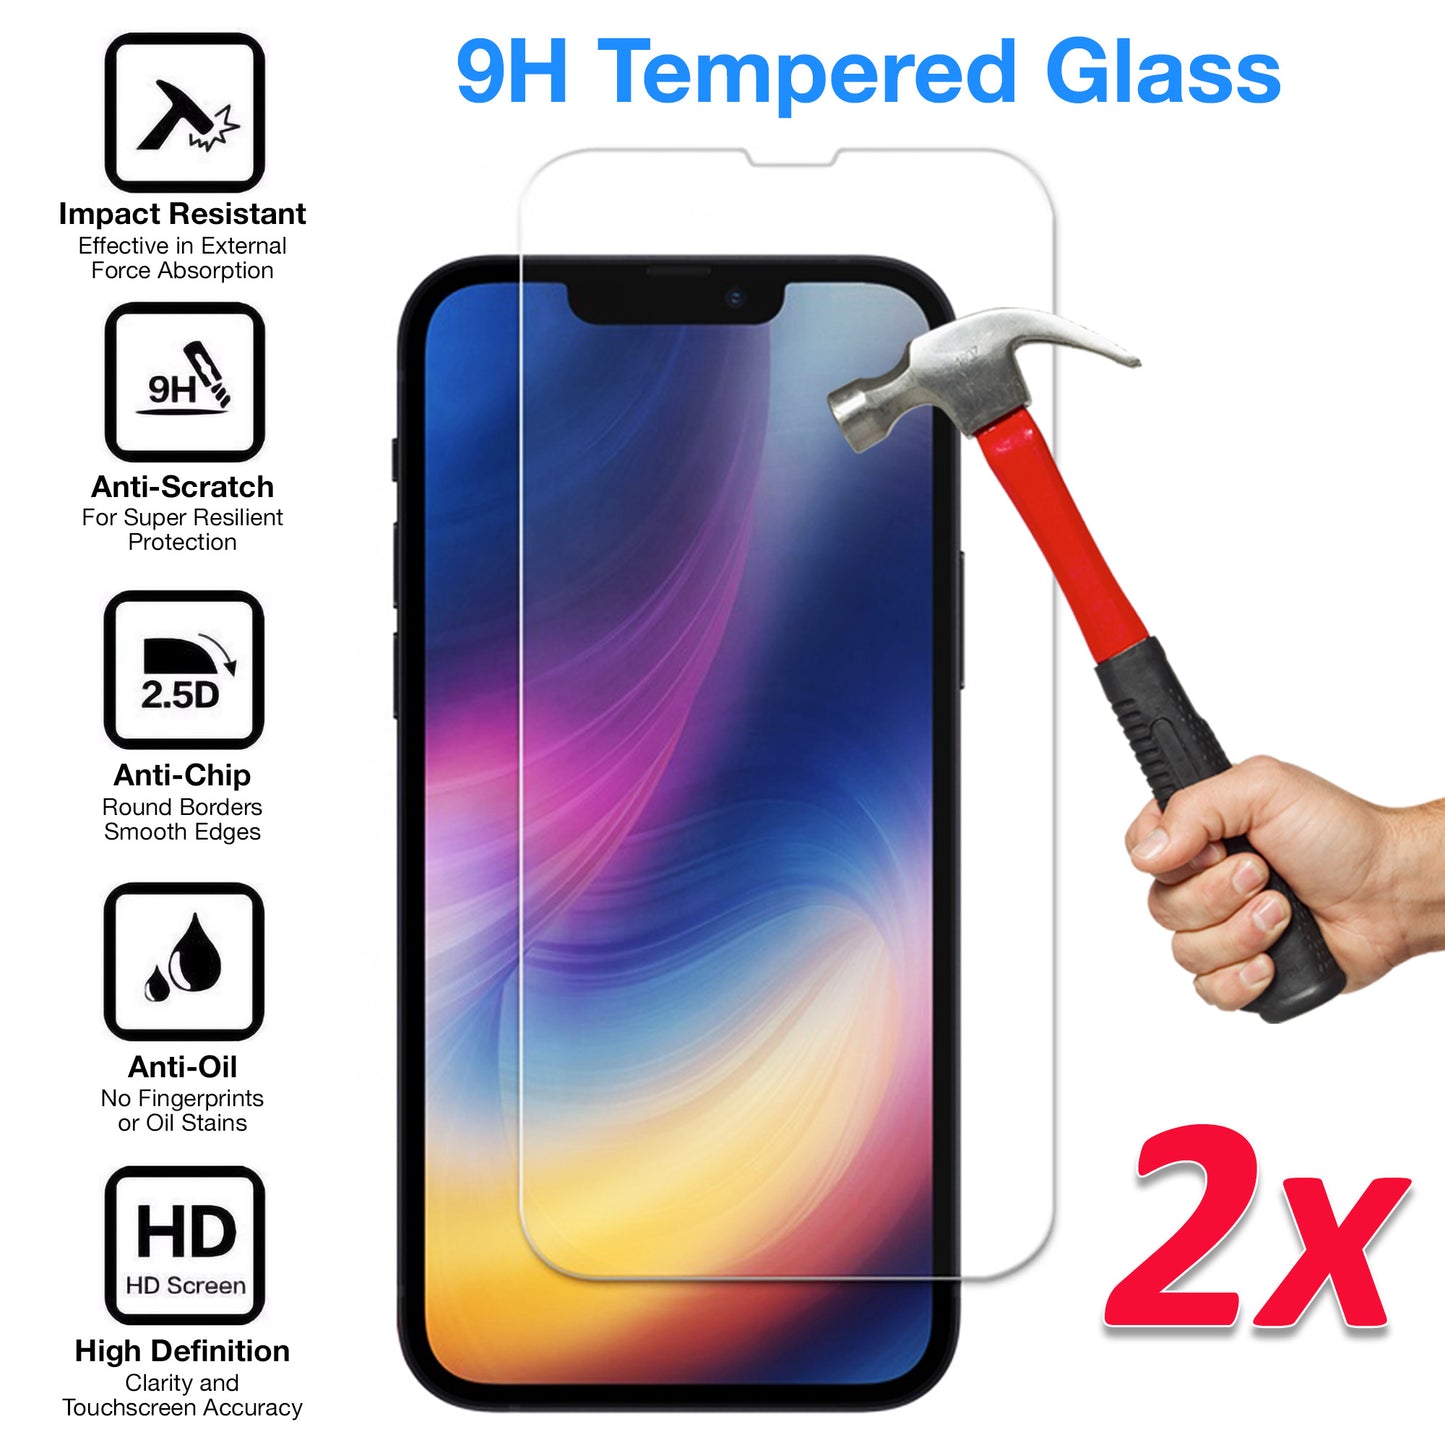 [2 Pack] MEZON Tempered Glass for iPhone 13 Pro (6.1") Crystal Clear Premium 9H HD Case Friendly Screen Protector